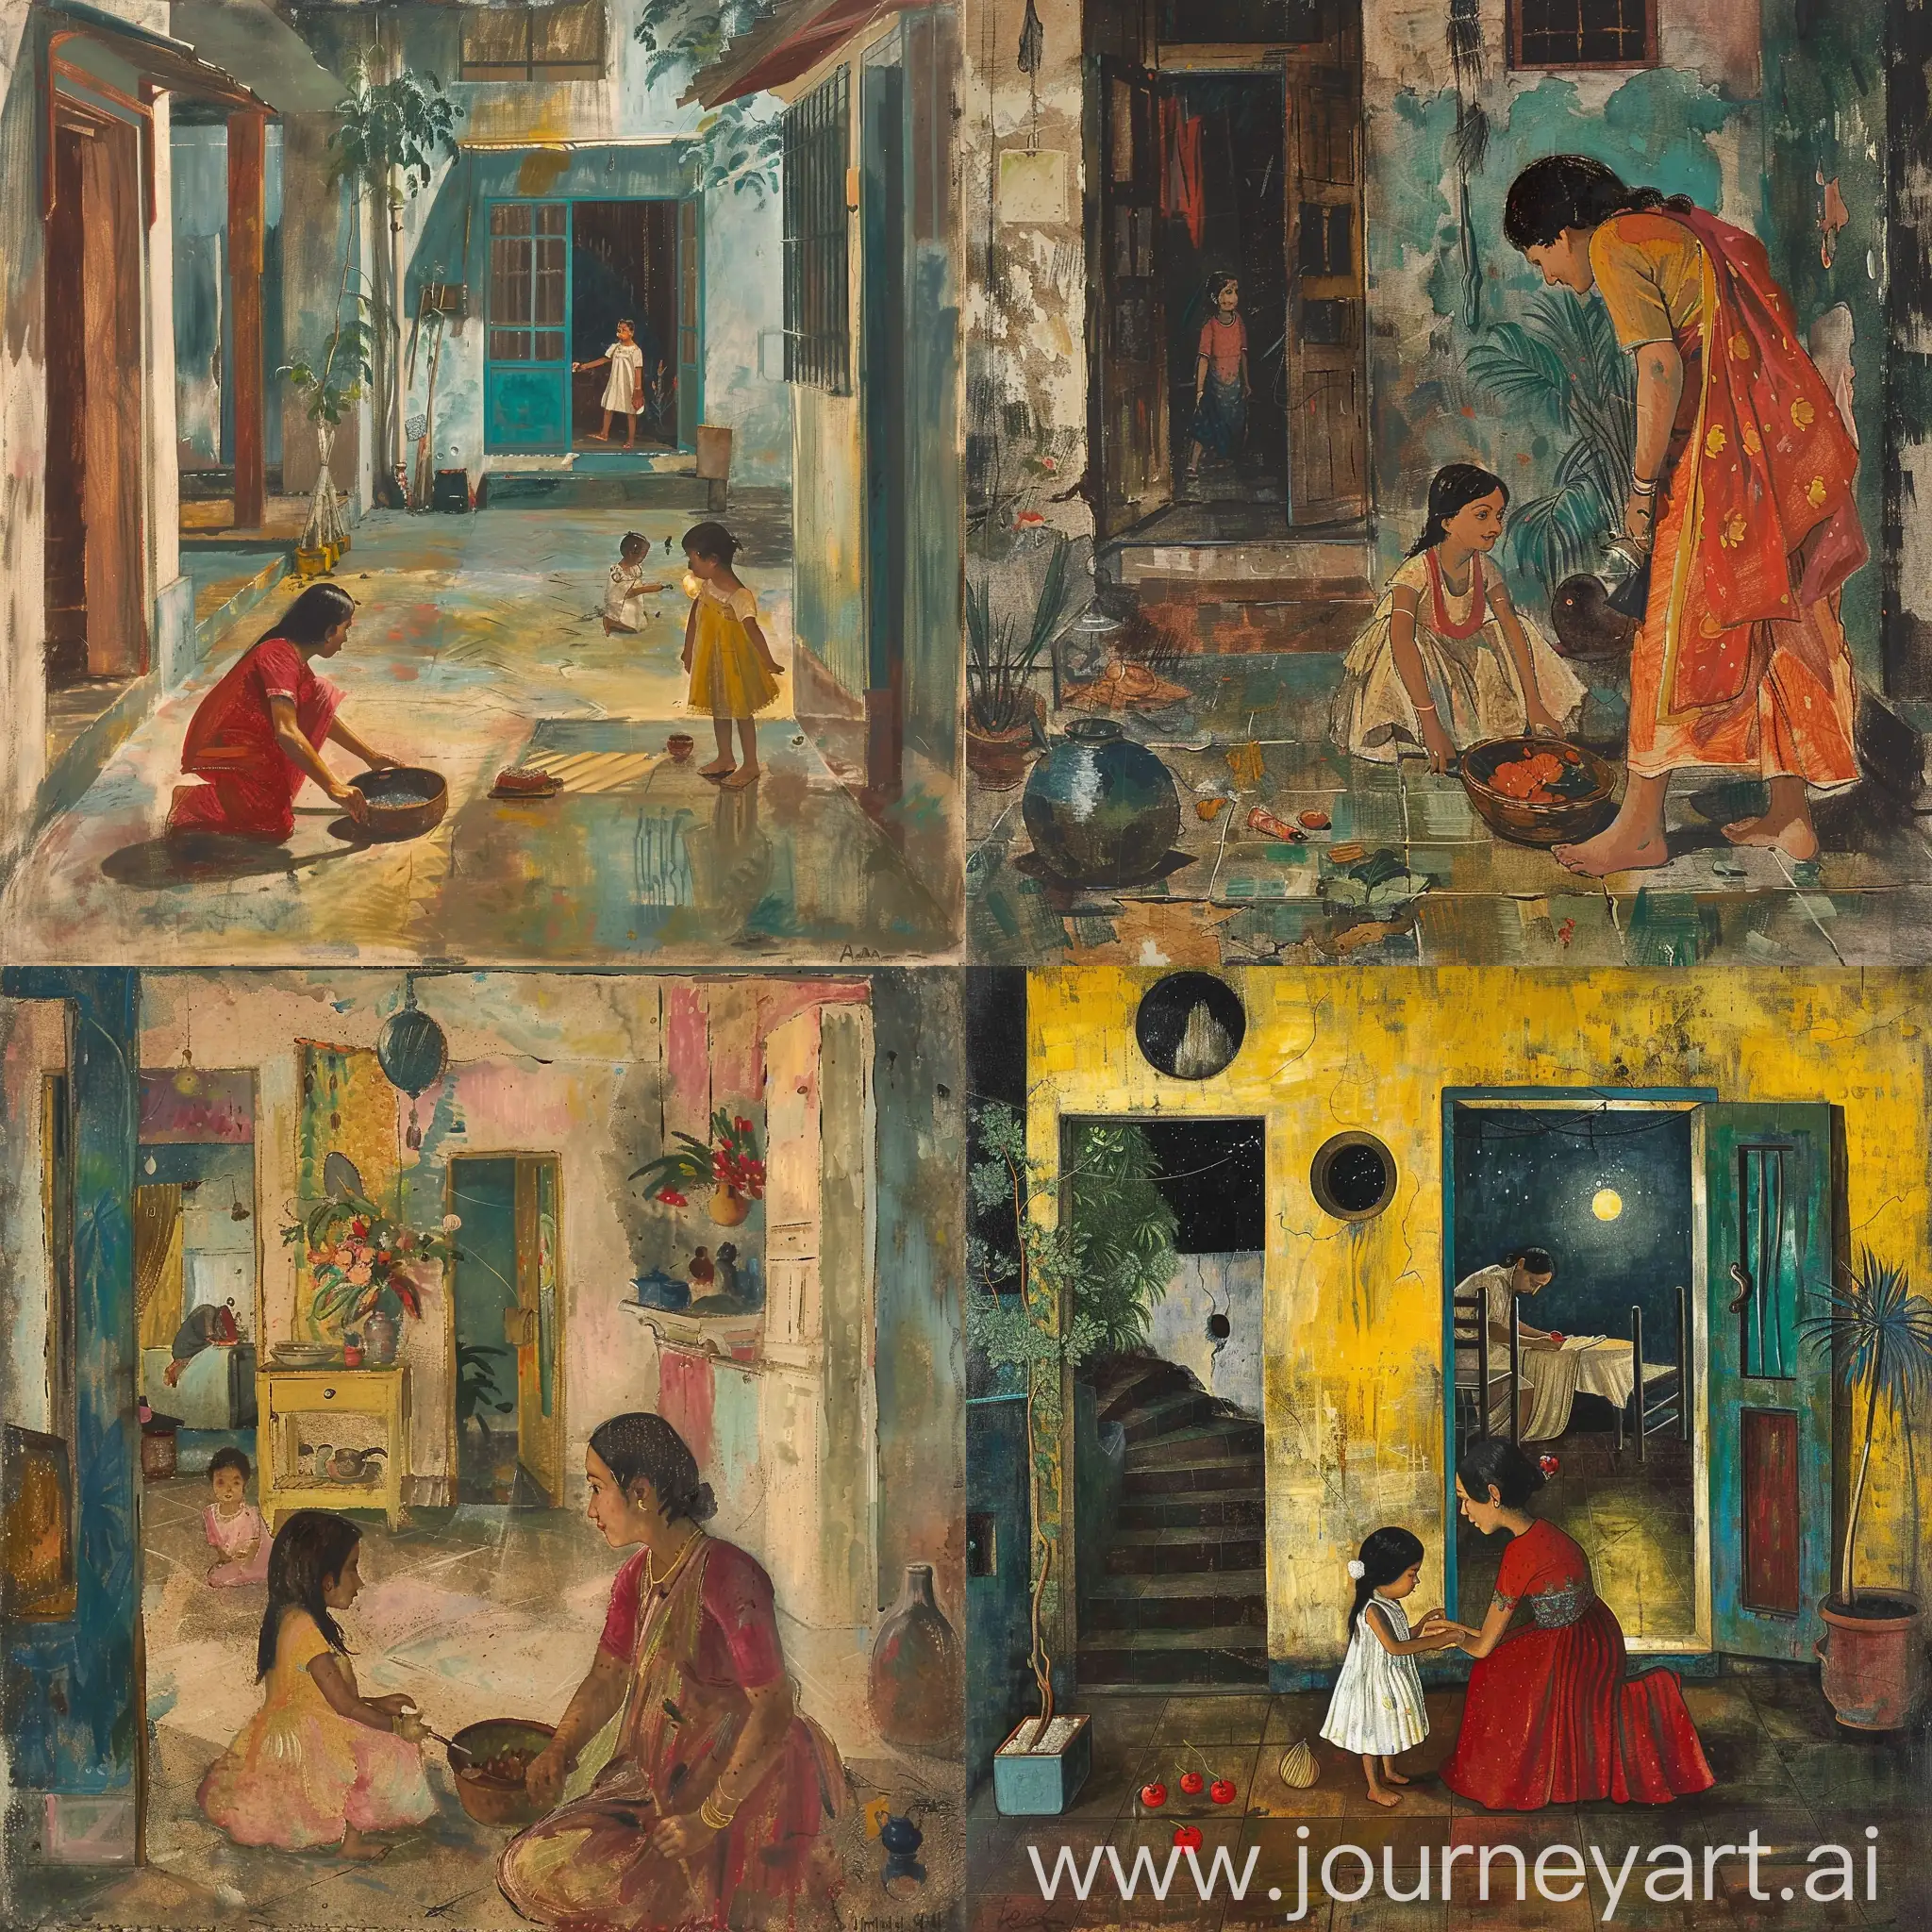 Amrita sher gil Artist painting is ladies one girl and mother his playing home ground 